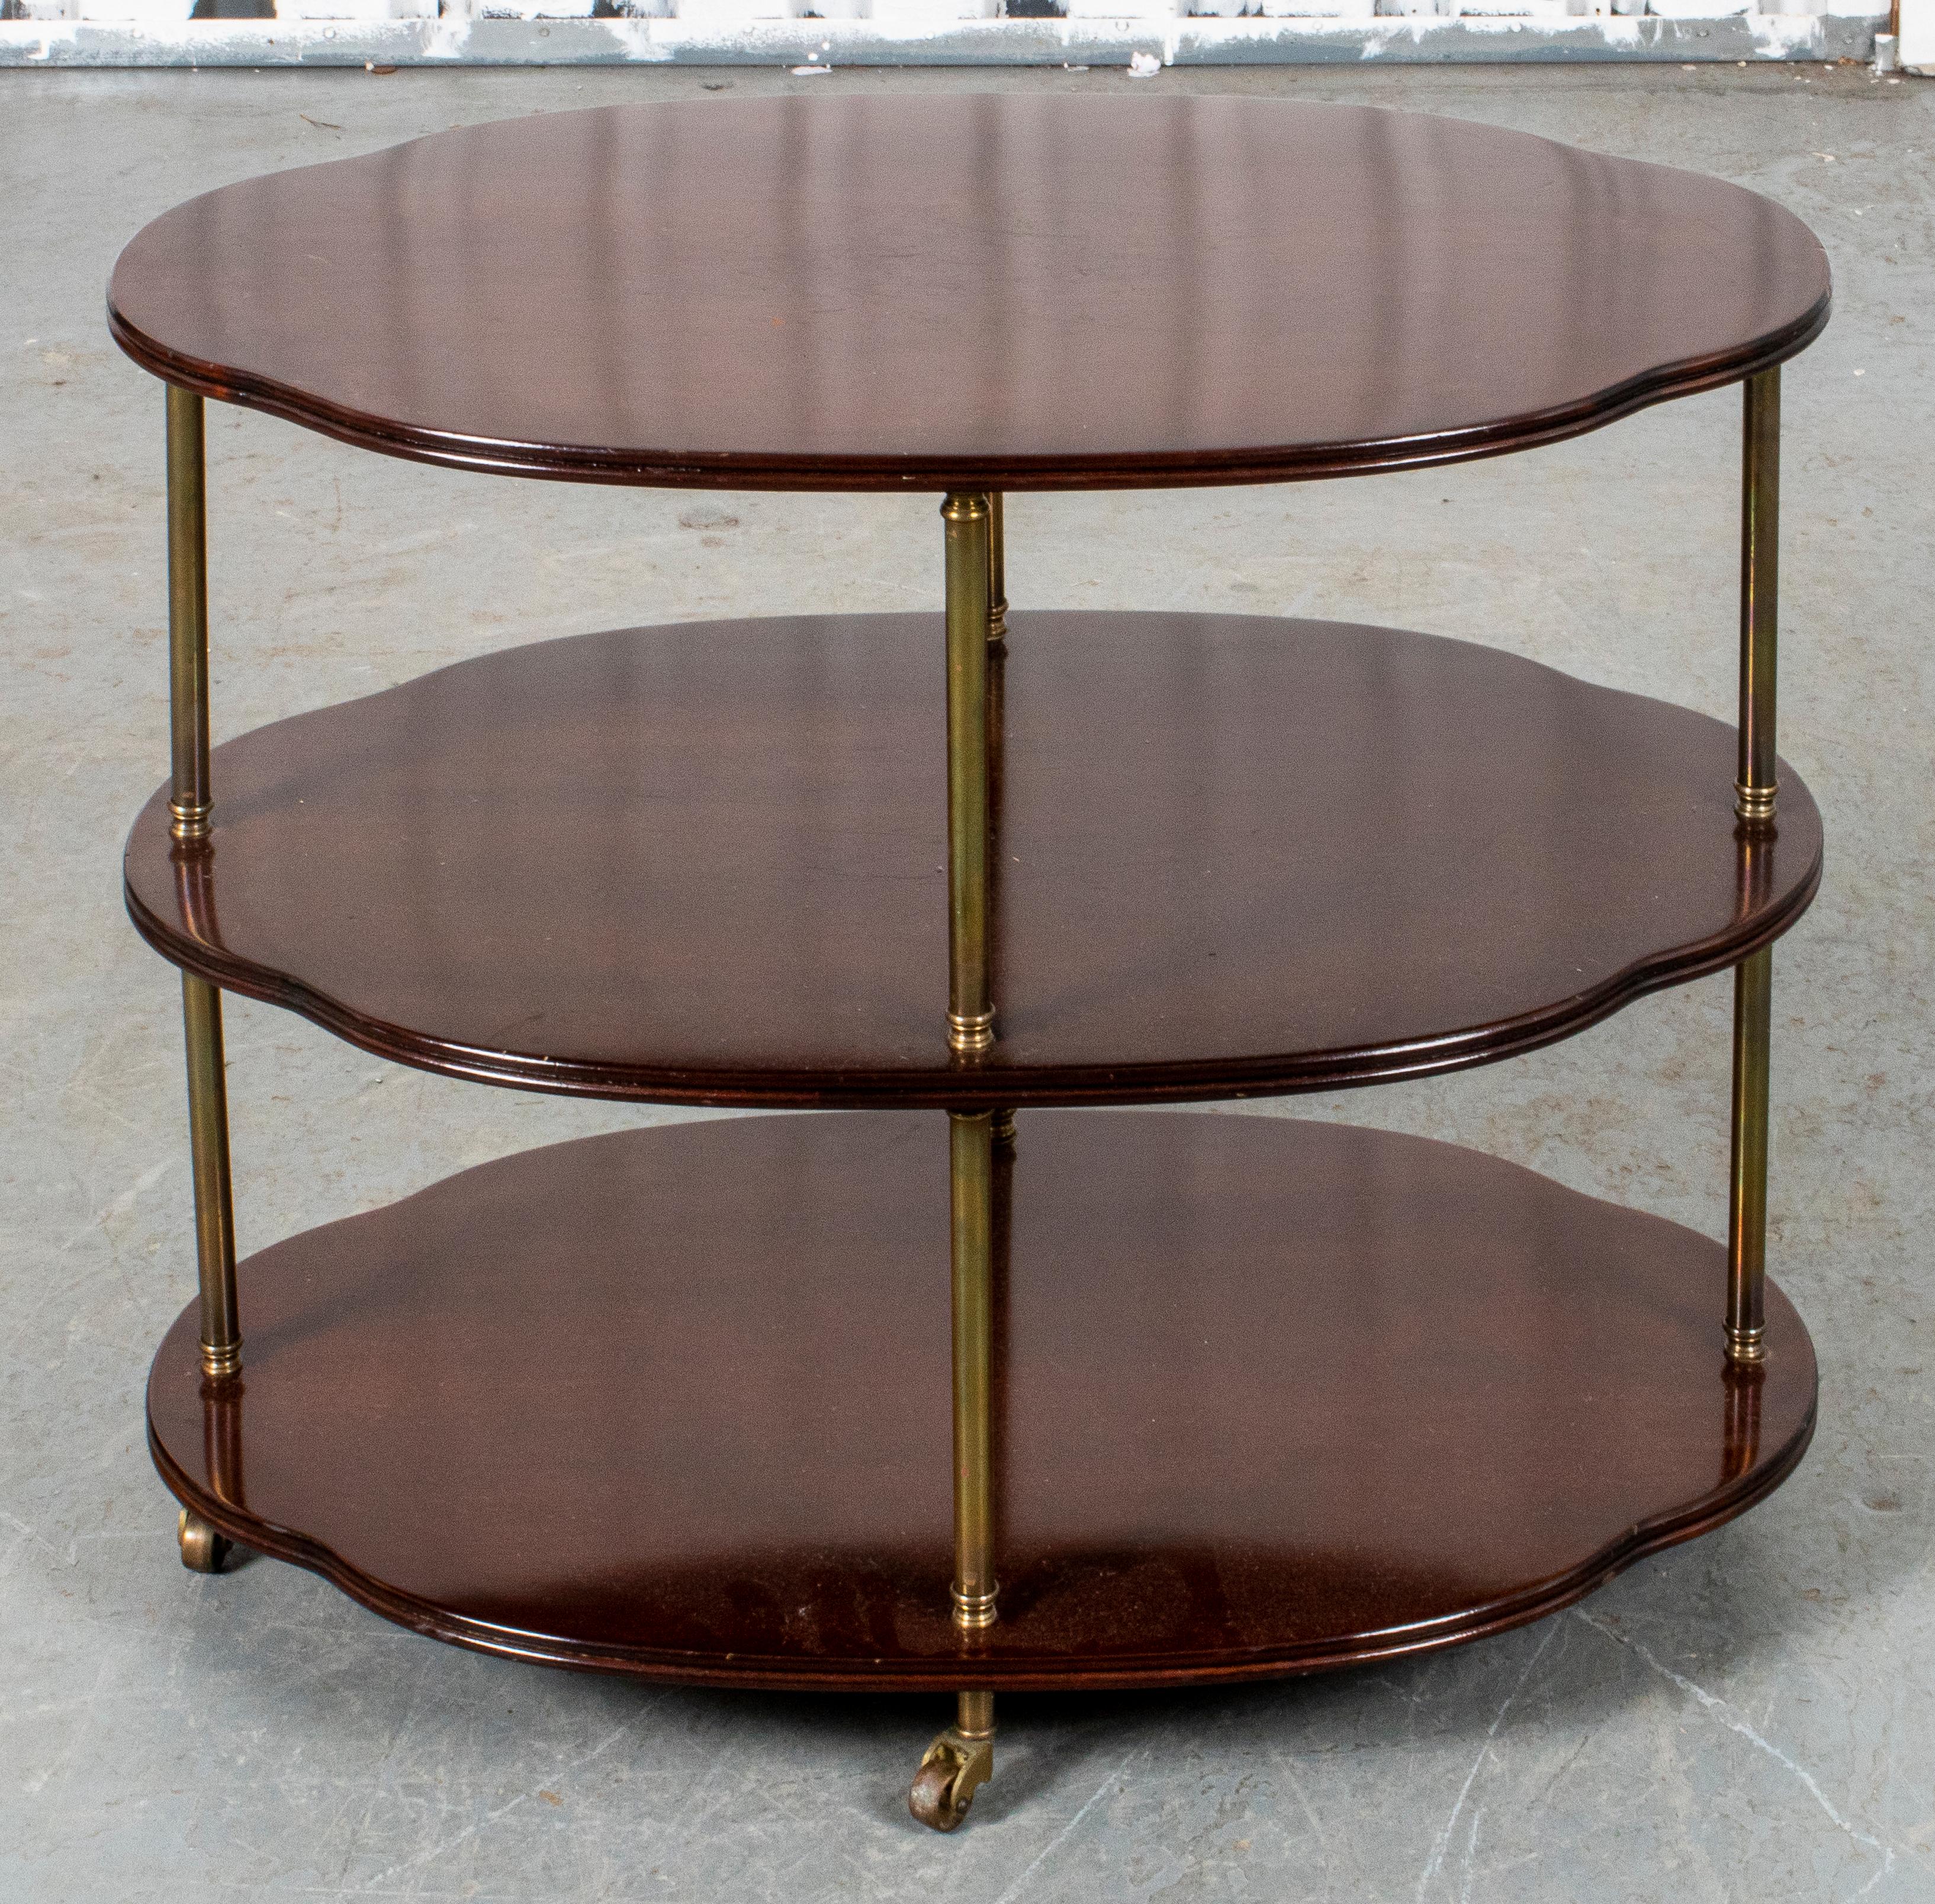 Classical manner diminutive serving table with three oval levels, on casters.